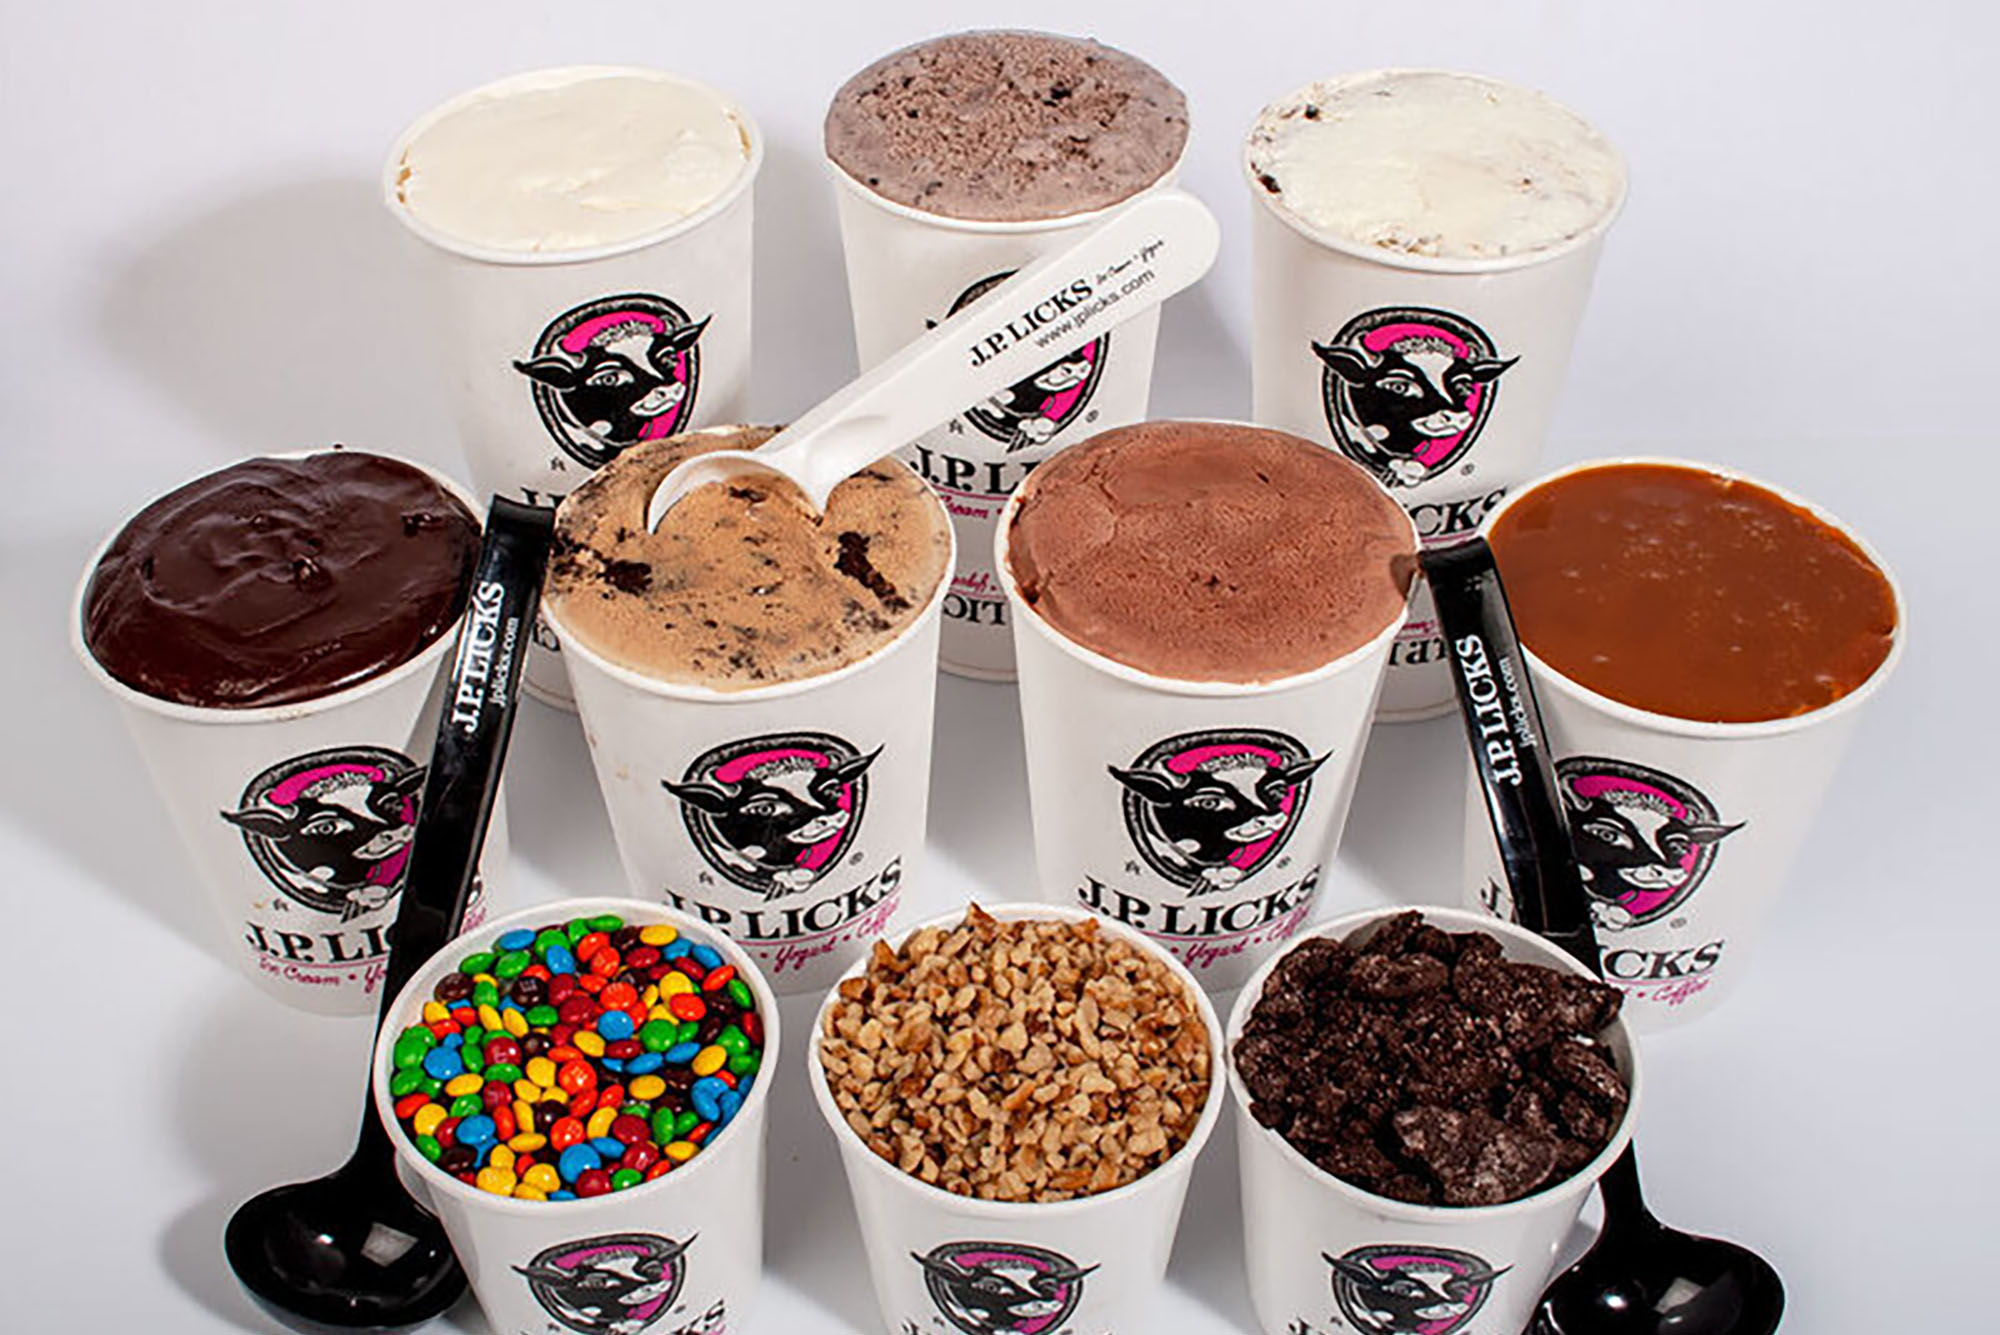 Photo: Ten different paper containers with the JP Licks logo sit on a white table. The ten different containers have different toppings and fillings for ice cream, showing JP Licks selection.